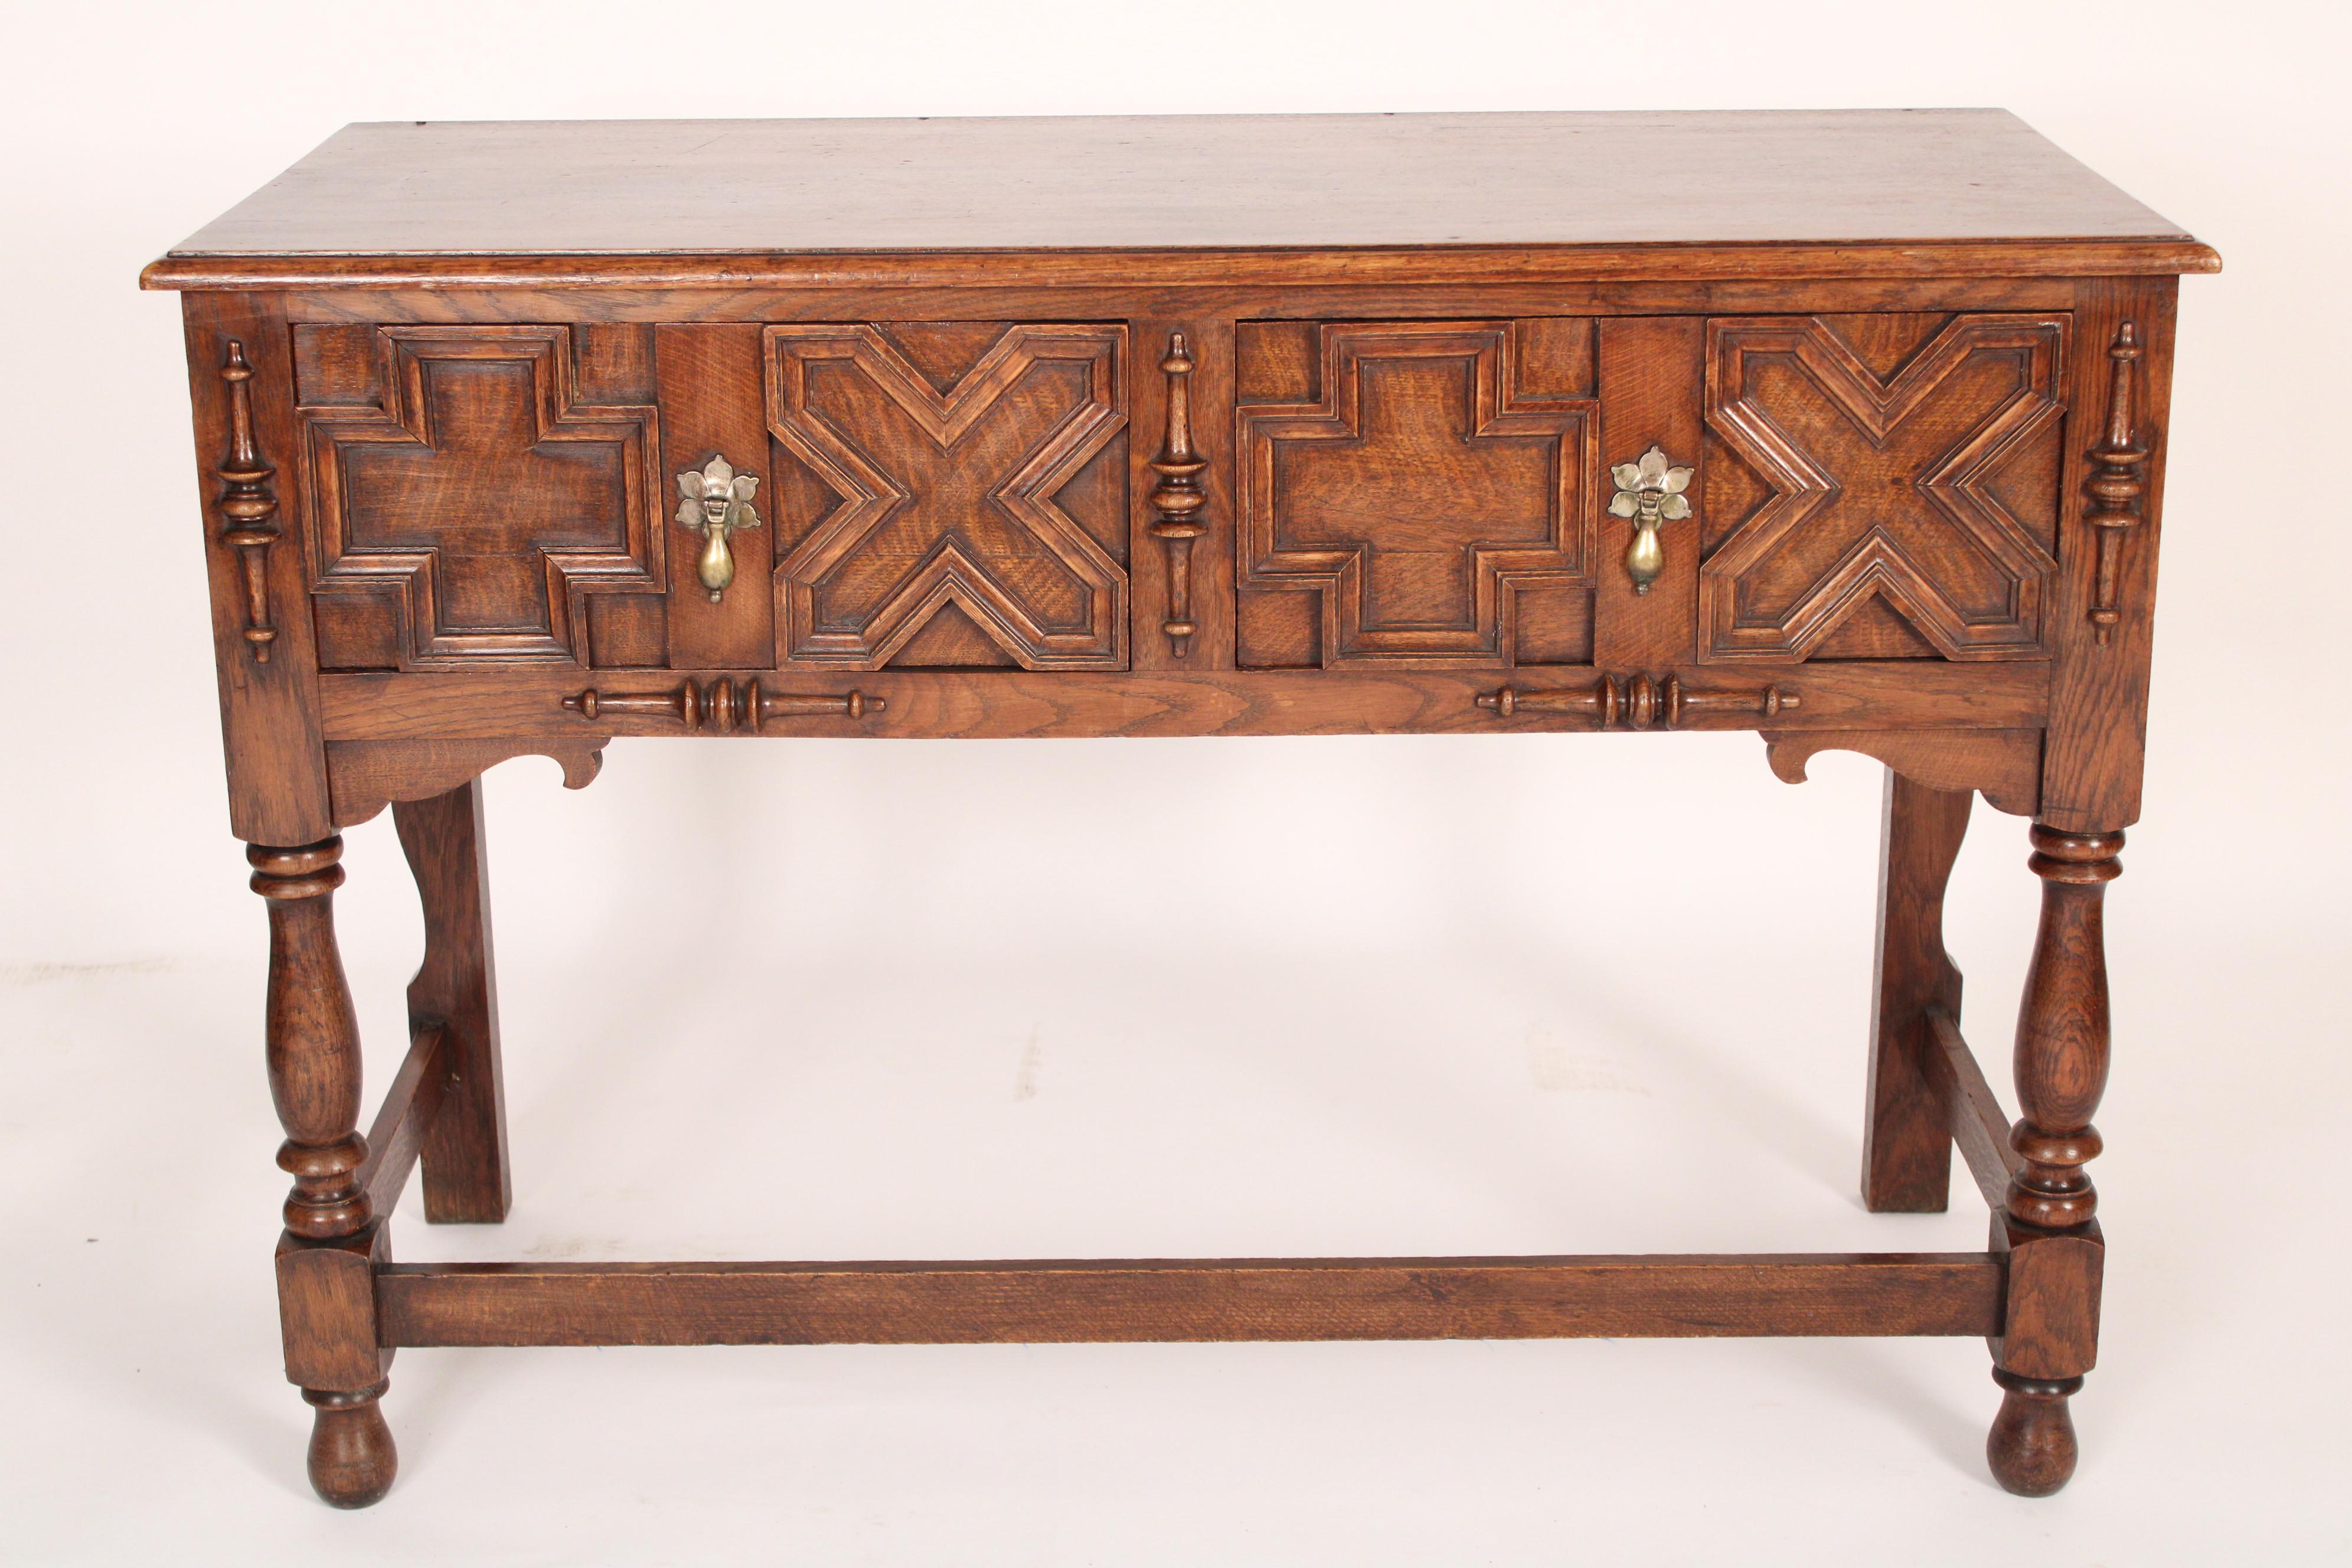 English oak Jacobean style sideboard / server/ console table, circa 1910. With a rectangular thumb molded top, two frieze drawers with geometric designed moldings and split and applied turnings, brass tear drop drawer pulls, turned legs joined by